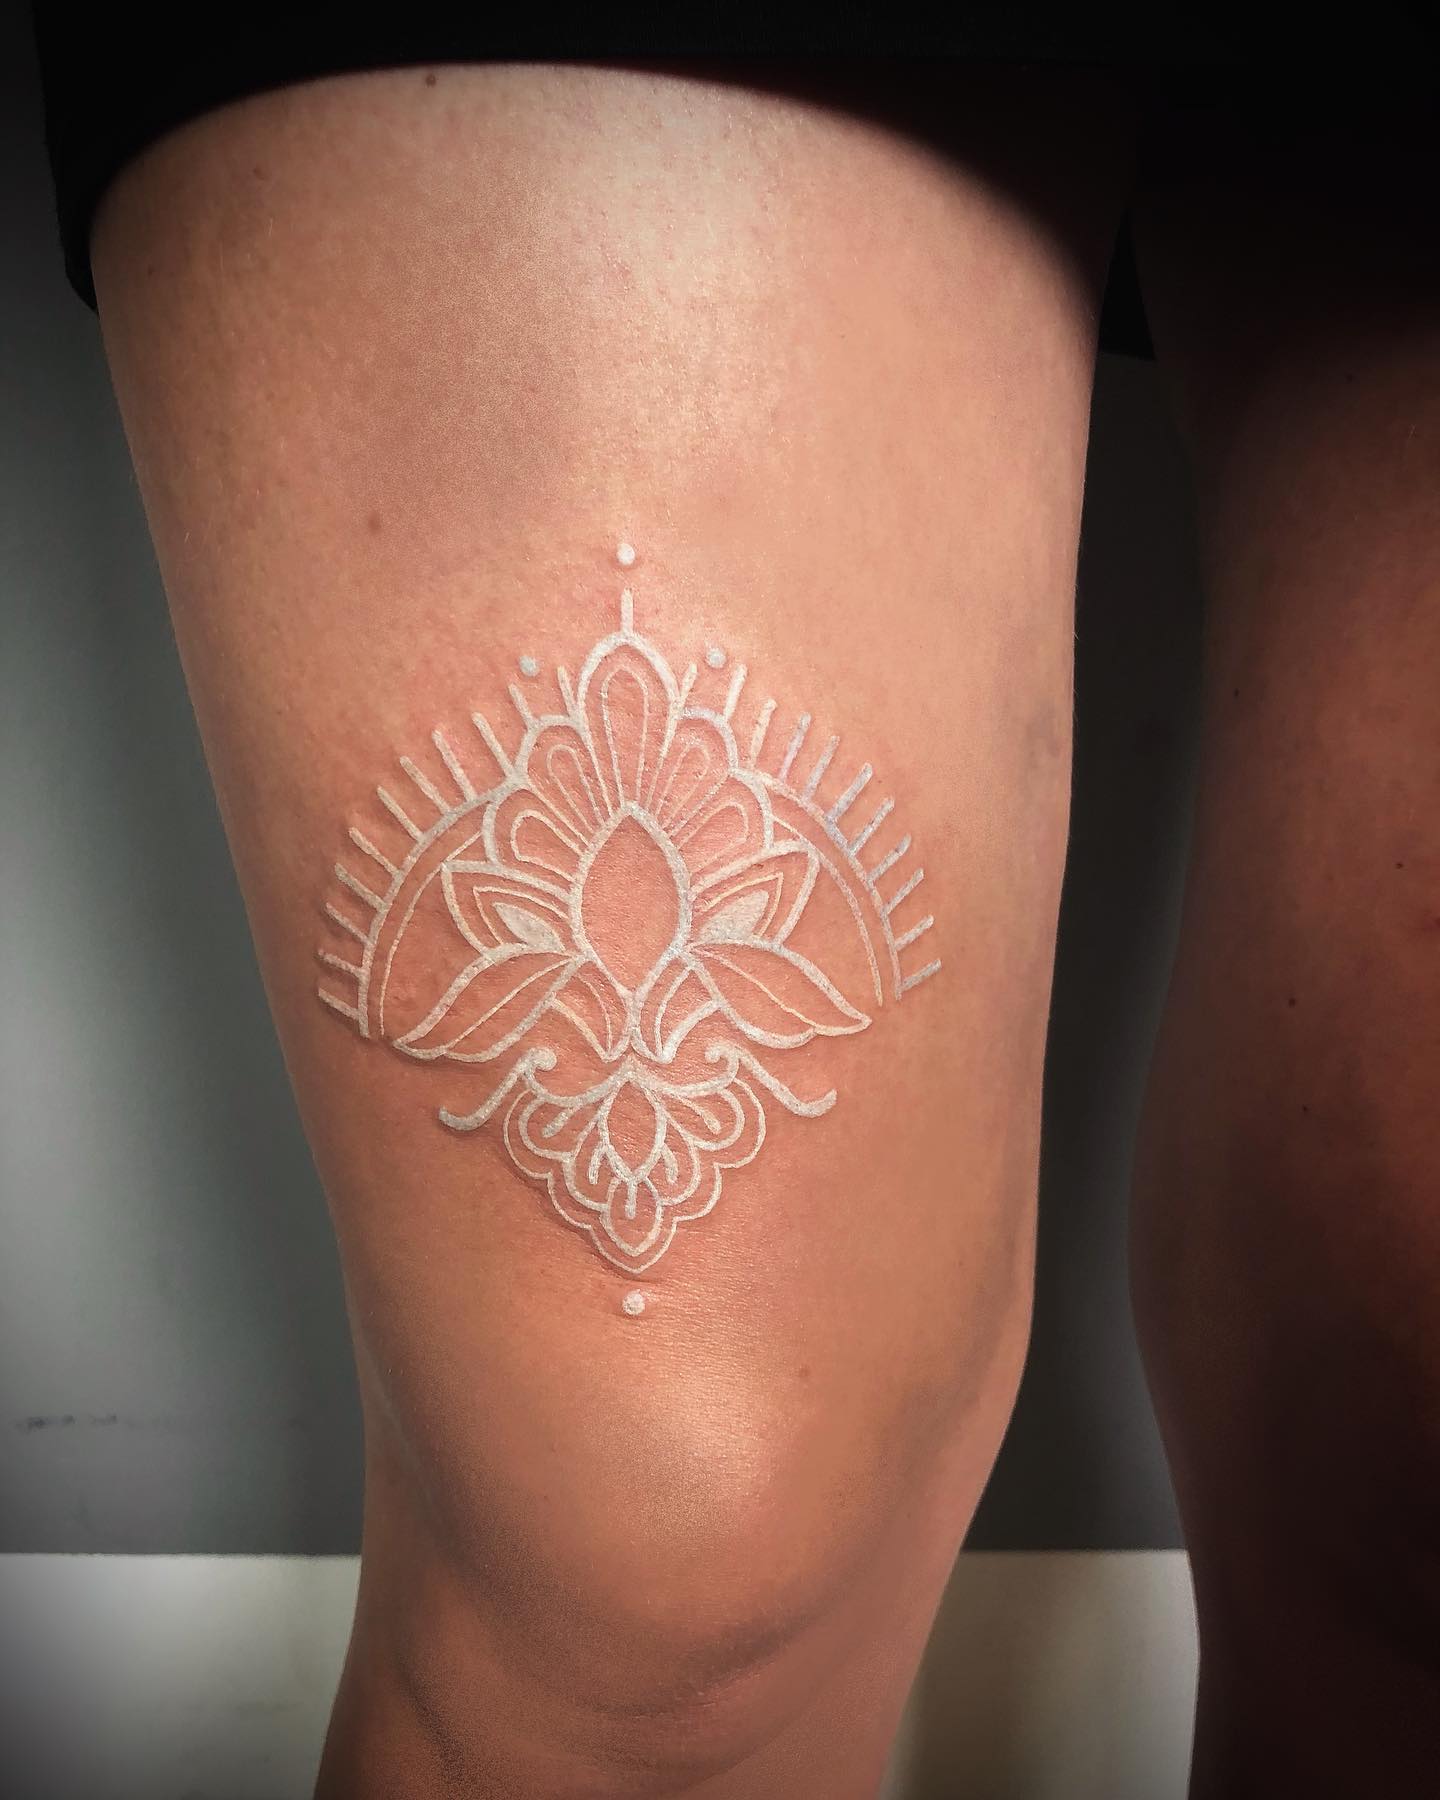 An ornamental tattoo is like jewelry for your skin. It's an accessory that can be used to express your personality and tell a story about who you are, or how you want people to see you. A white ornamental tattoo on your upper leg will make you stand out, are you ready for it?